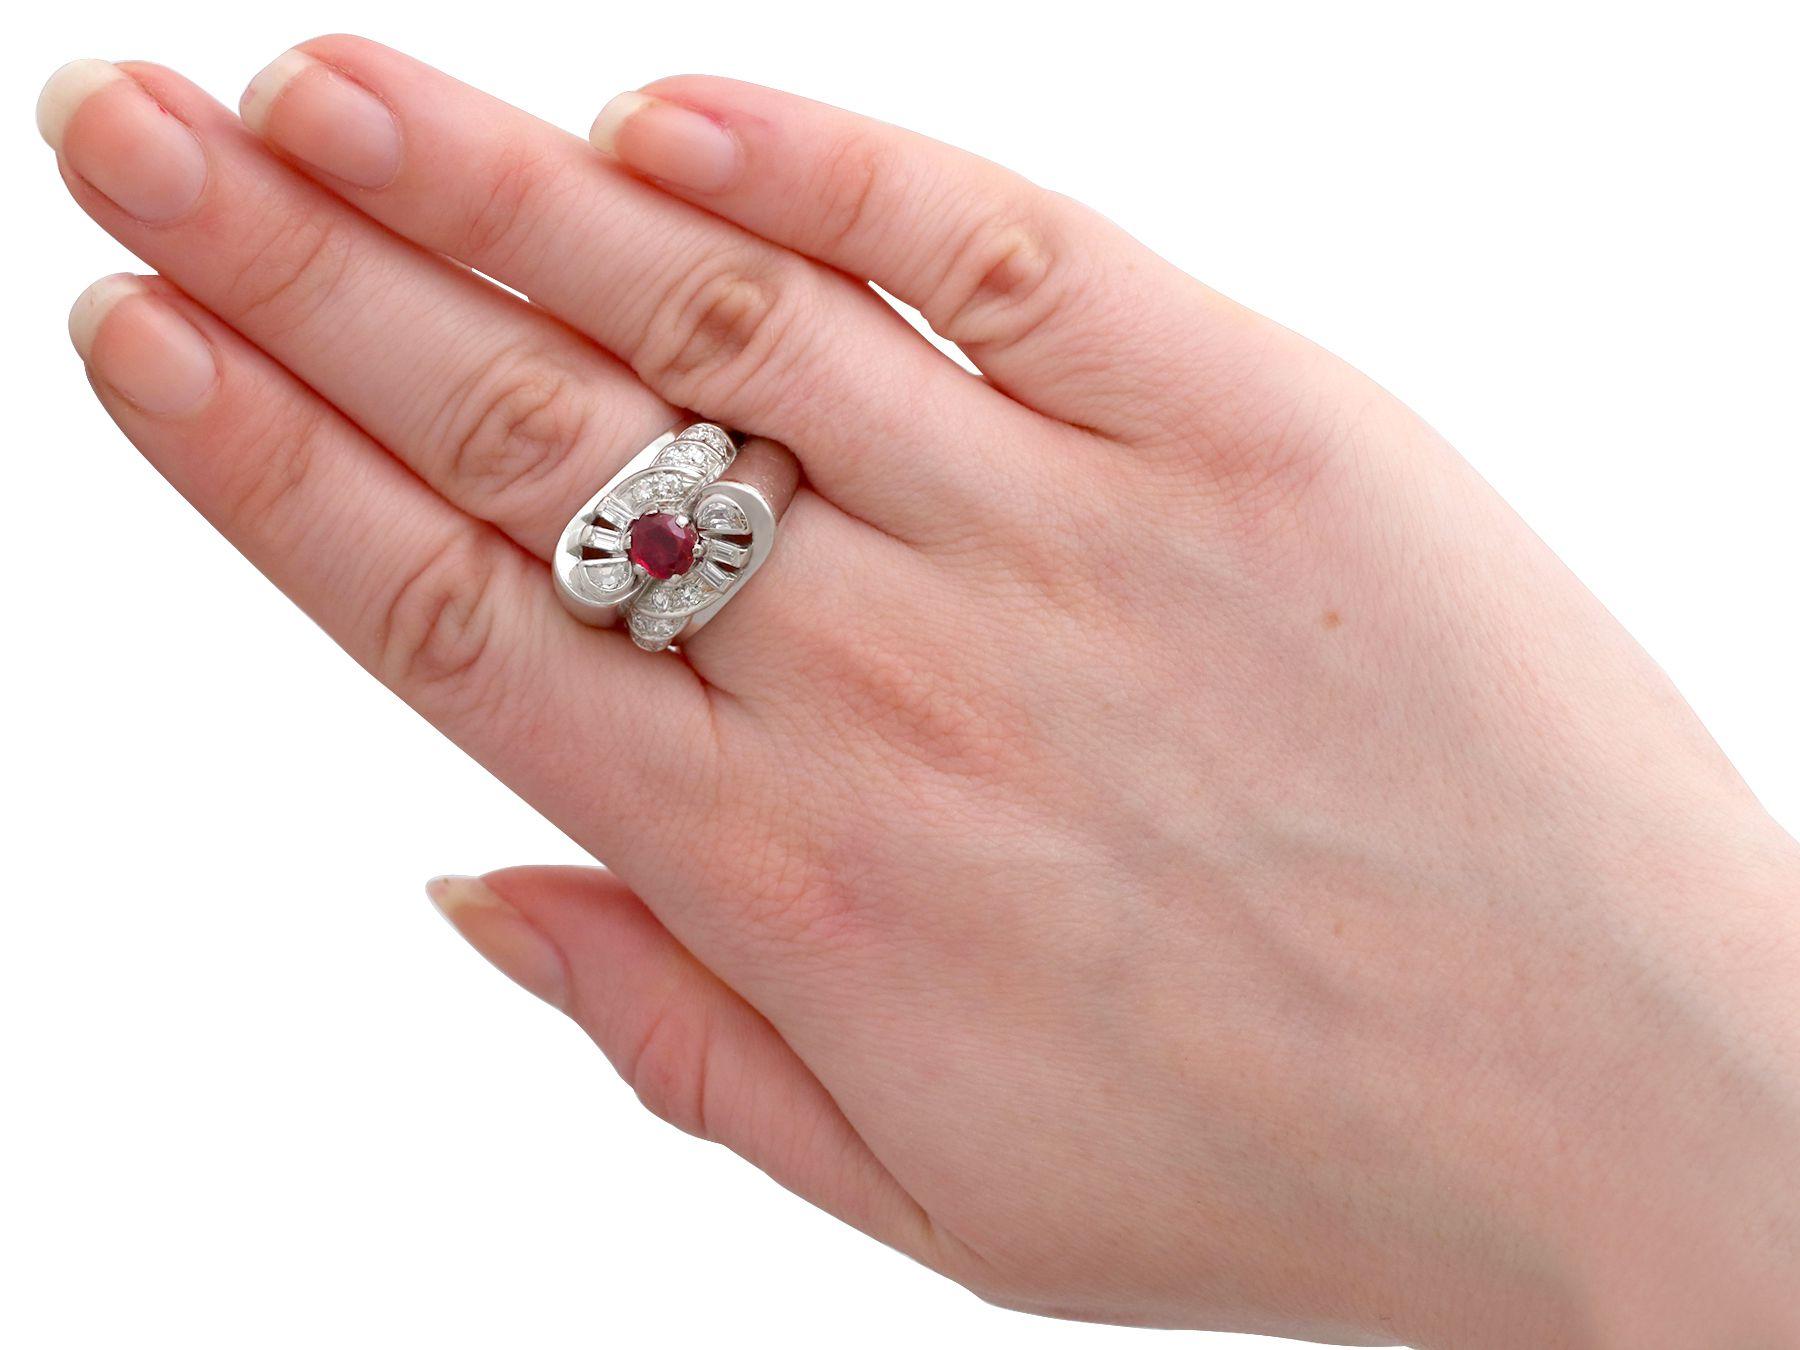 Vintage French 1940s Oval Cut Ruby and Diamond Platinum Cocktail Ring In Excellent Condition For Sale In Jesmond, Newcastle Upon Tyne